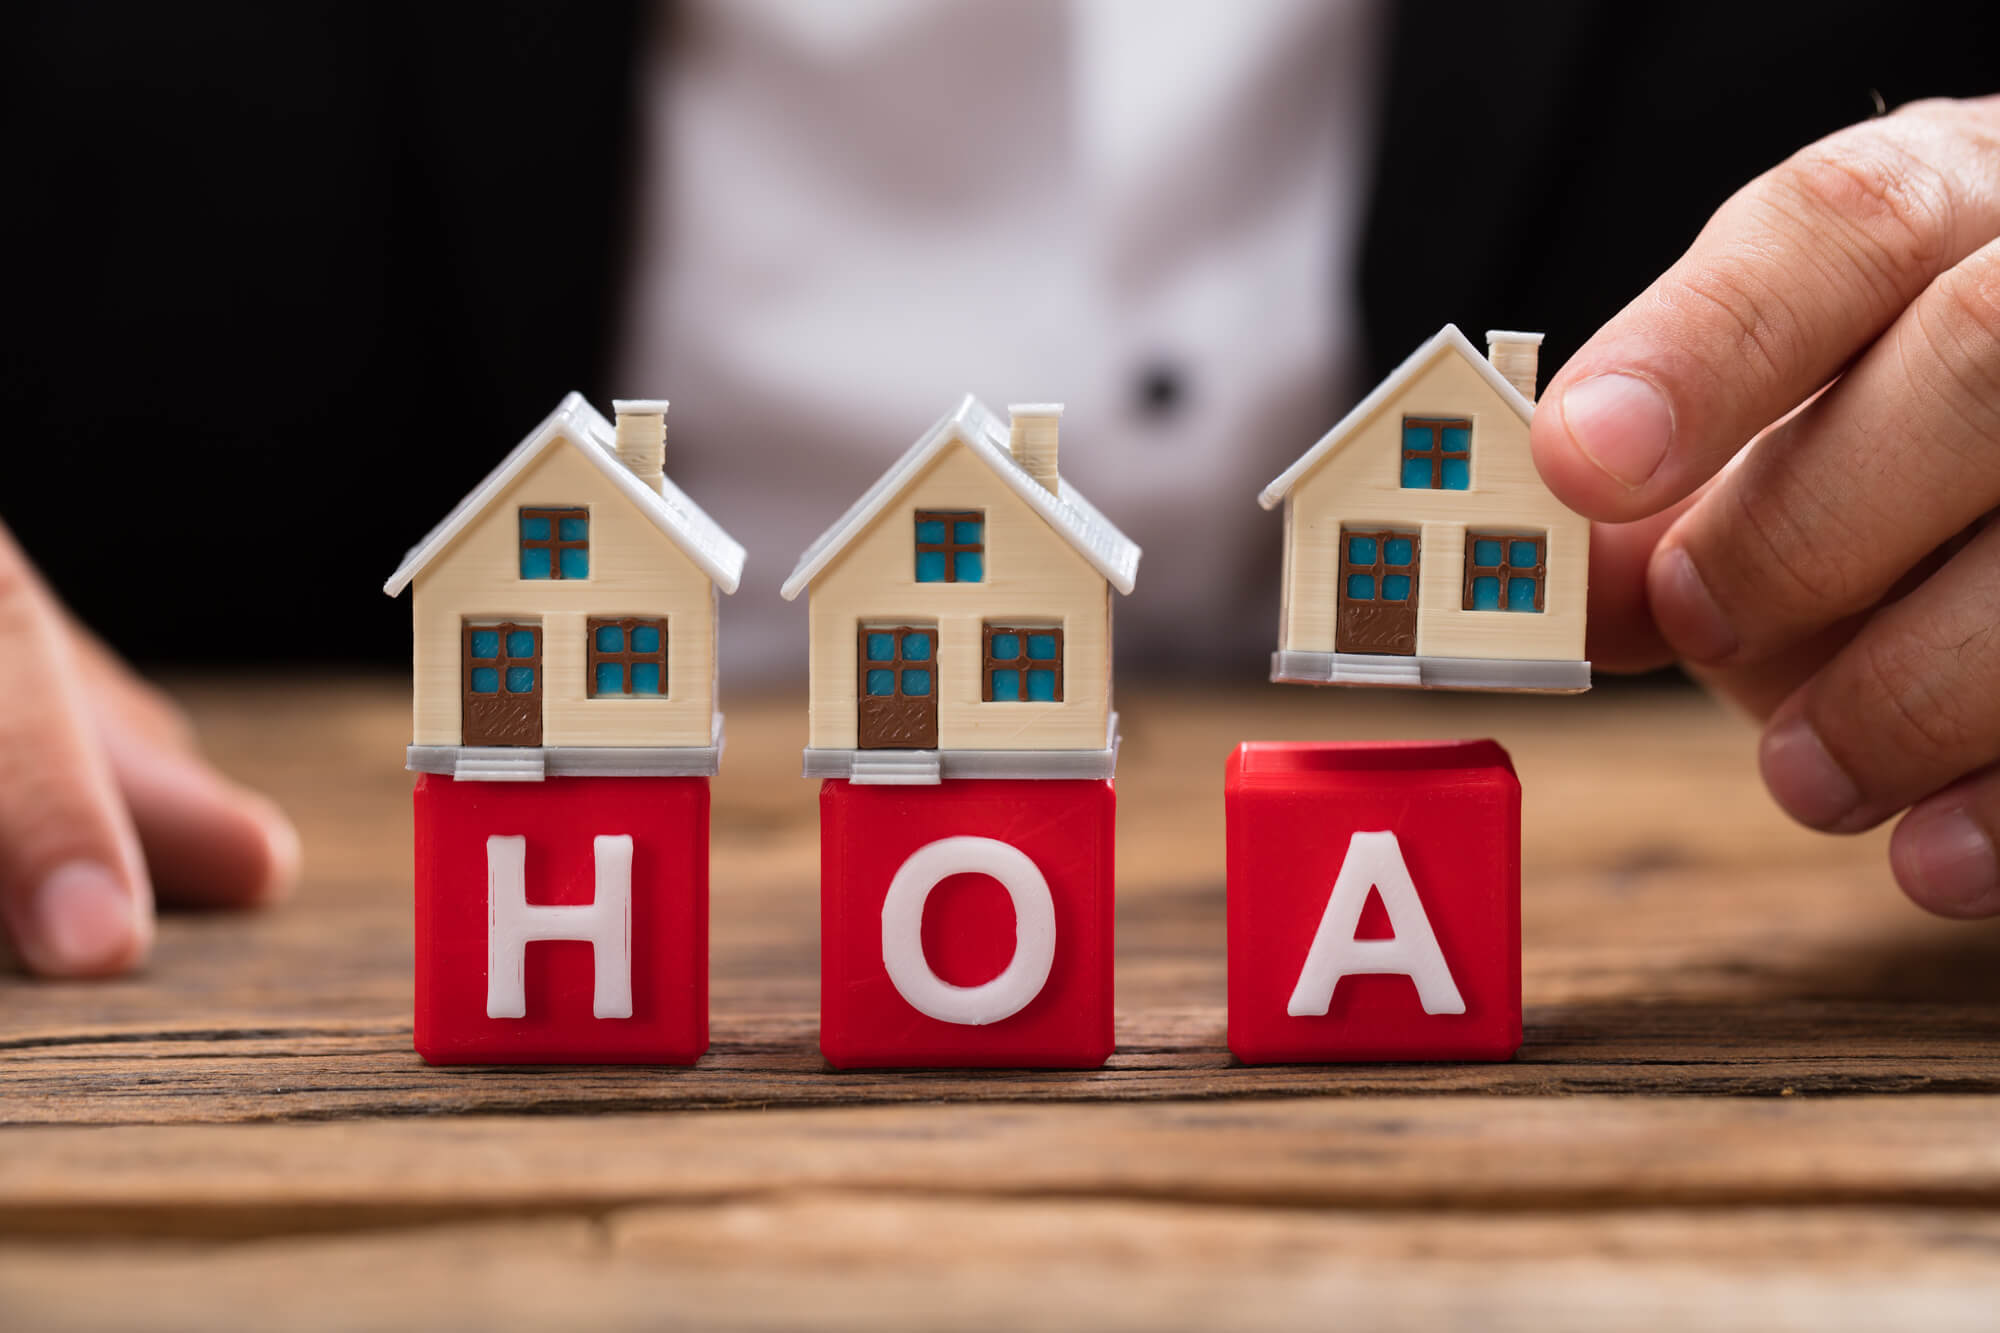 toy houses on blocks spelling out HOA